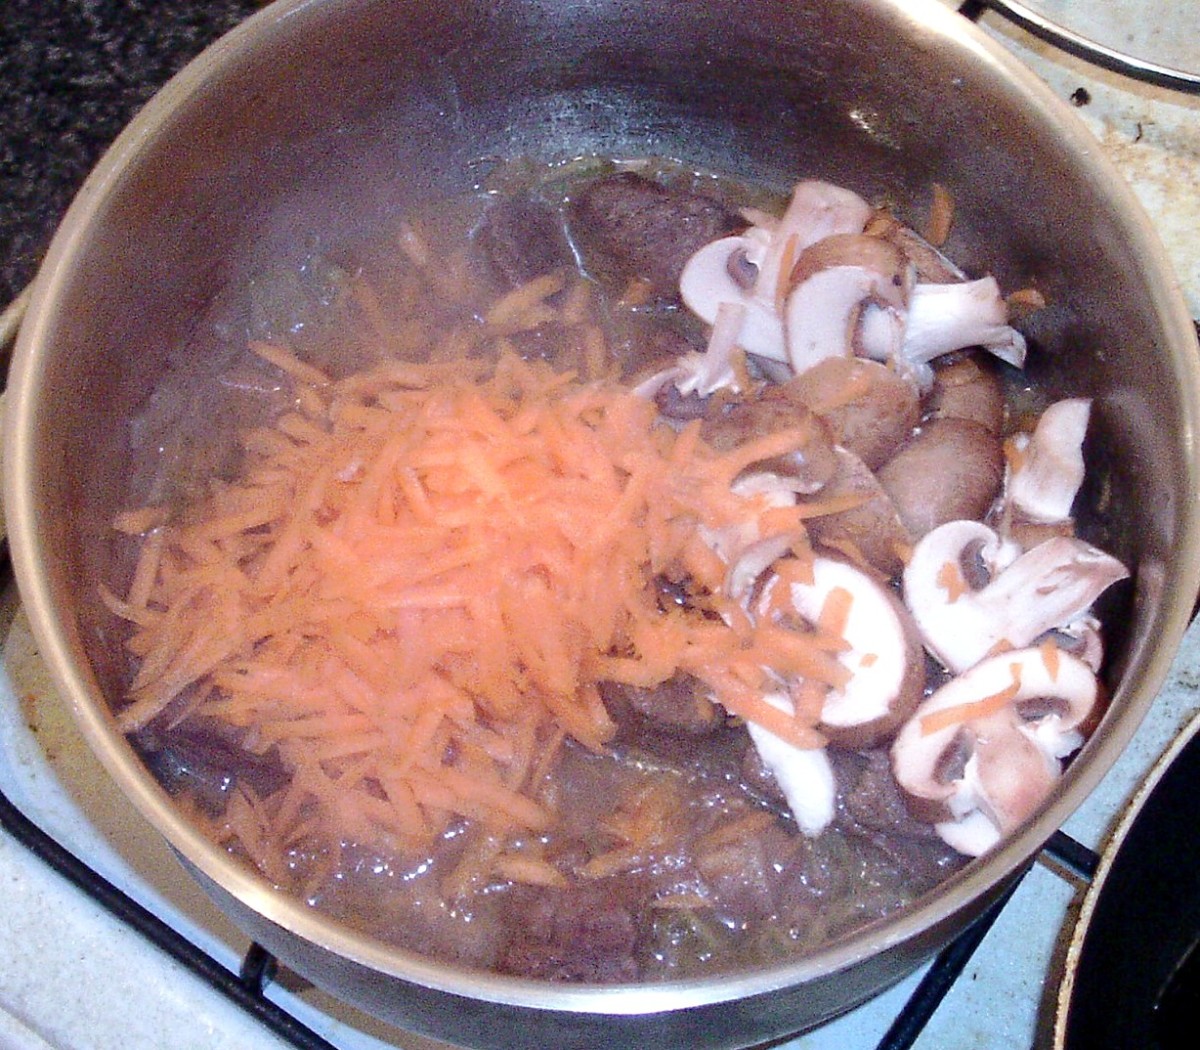 Add grated carrot and sliced mushrooms to stew